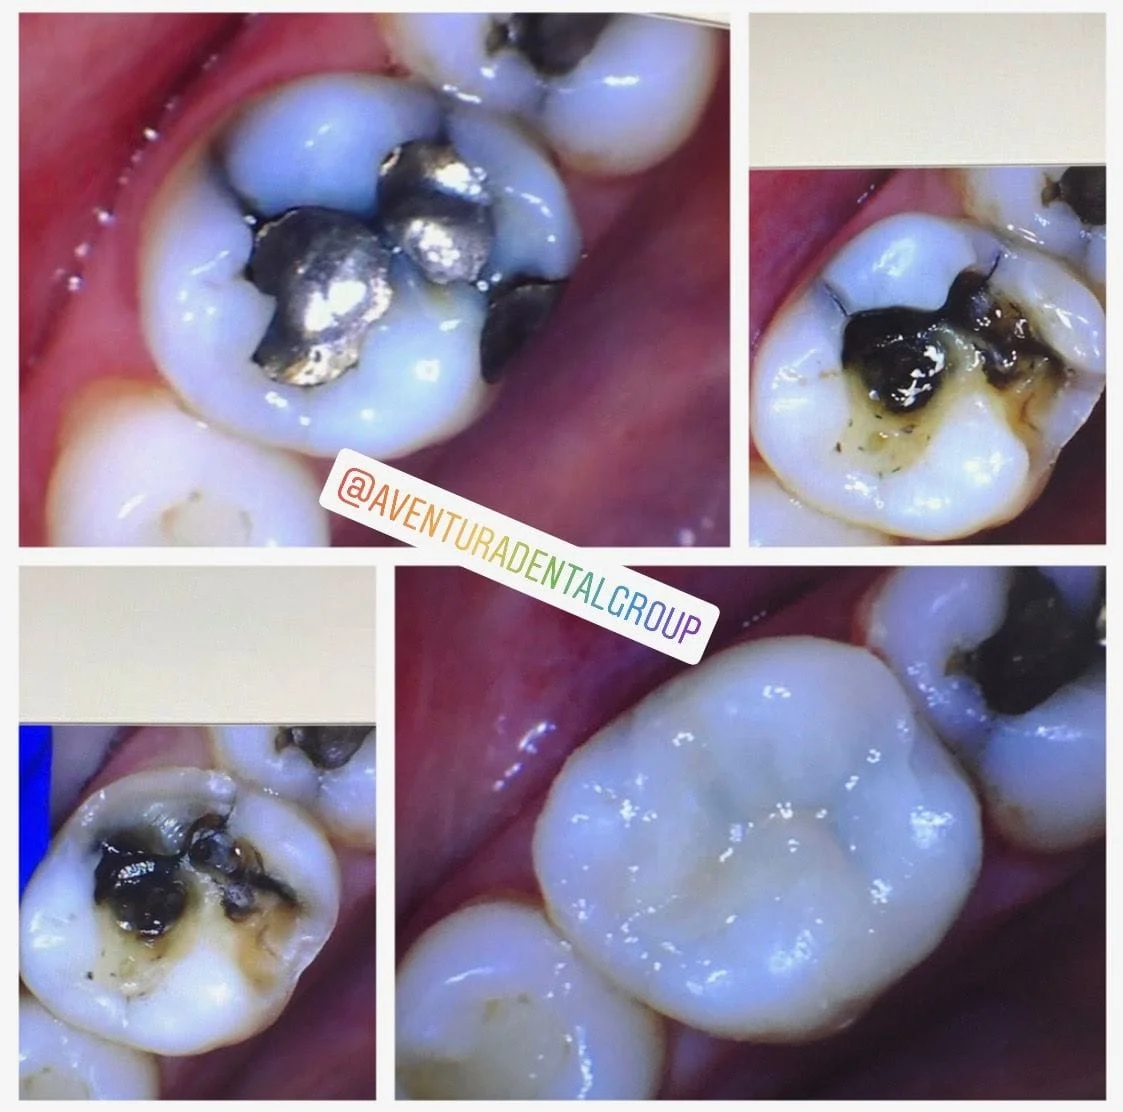 Holistic Amalgam Teeth Filling Removal and minimally invasive dental prep for onlay, only at Aventura Dental Group located  at 20475 Biscayne Blvd., Aventura FL 33180.